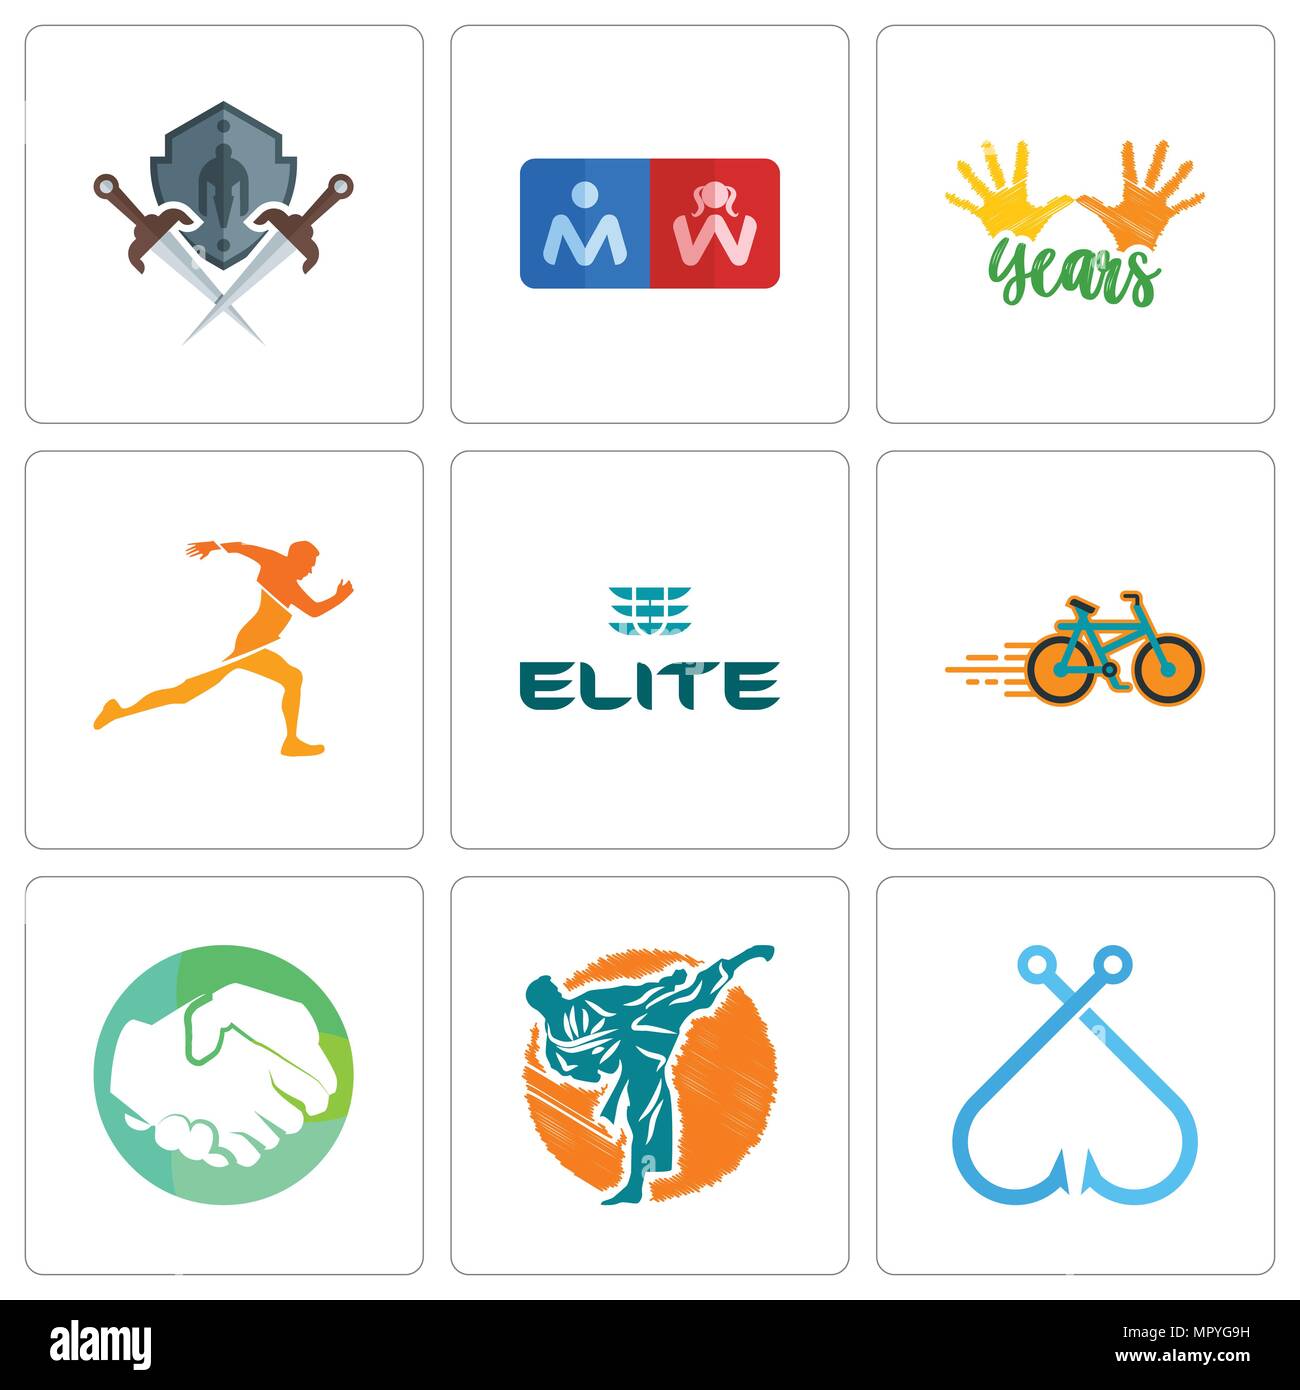 Set Of 9 simple editable icons such as fishing hook, martial arts, hands shaking, bike shop, the elite, running club, 10 years, restroom, shield and s Stock Vector